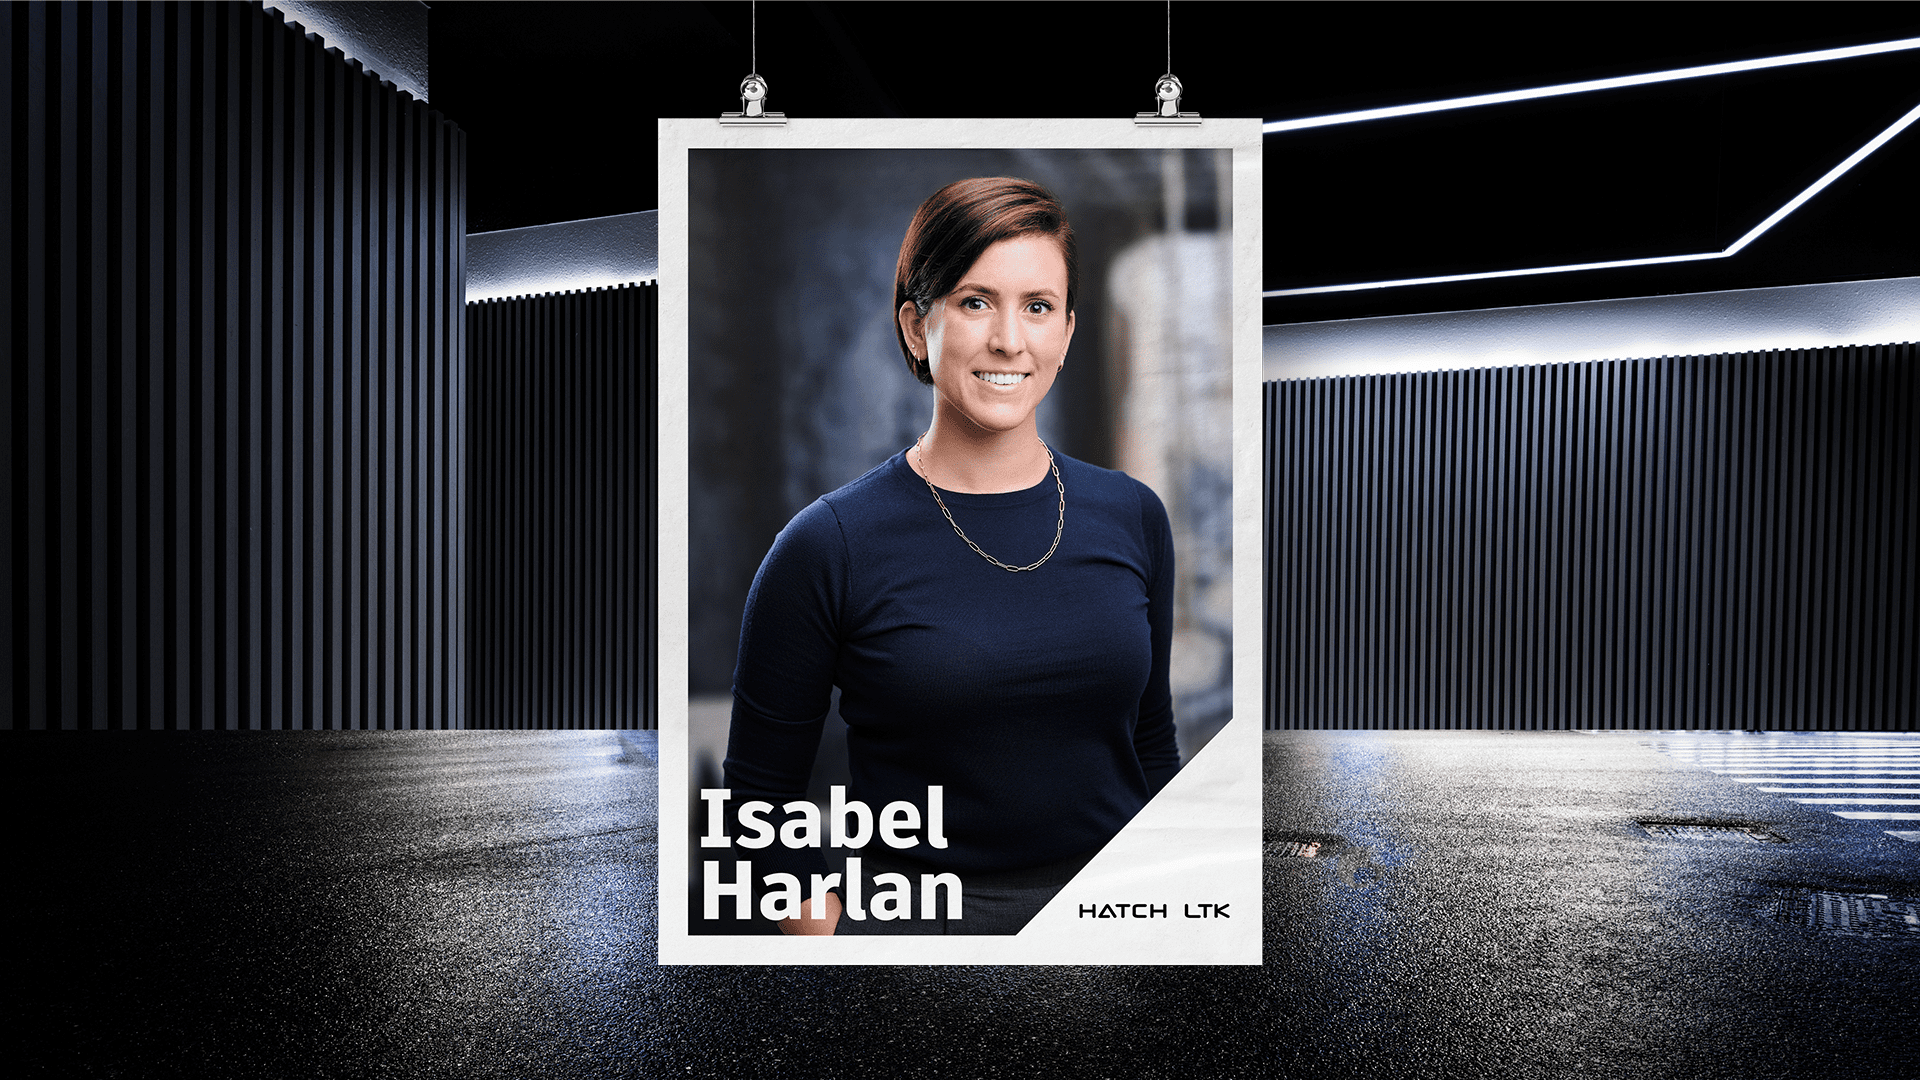 Isabel Harlan, Civil Engineer and Project Manager, Hatch LTK